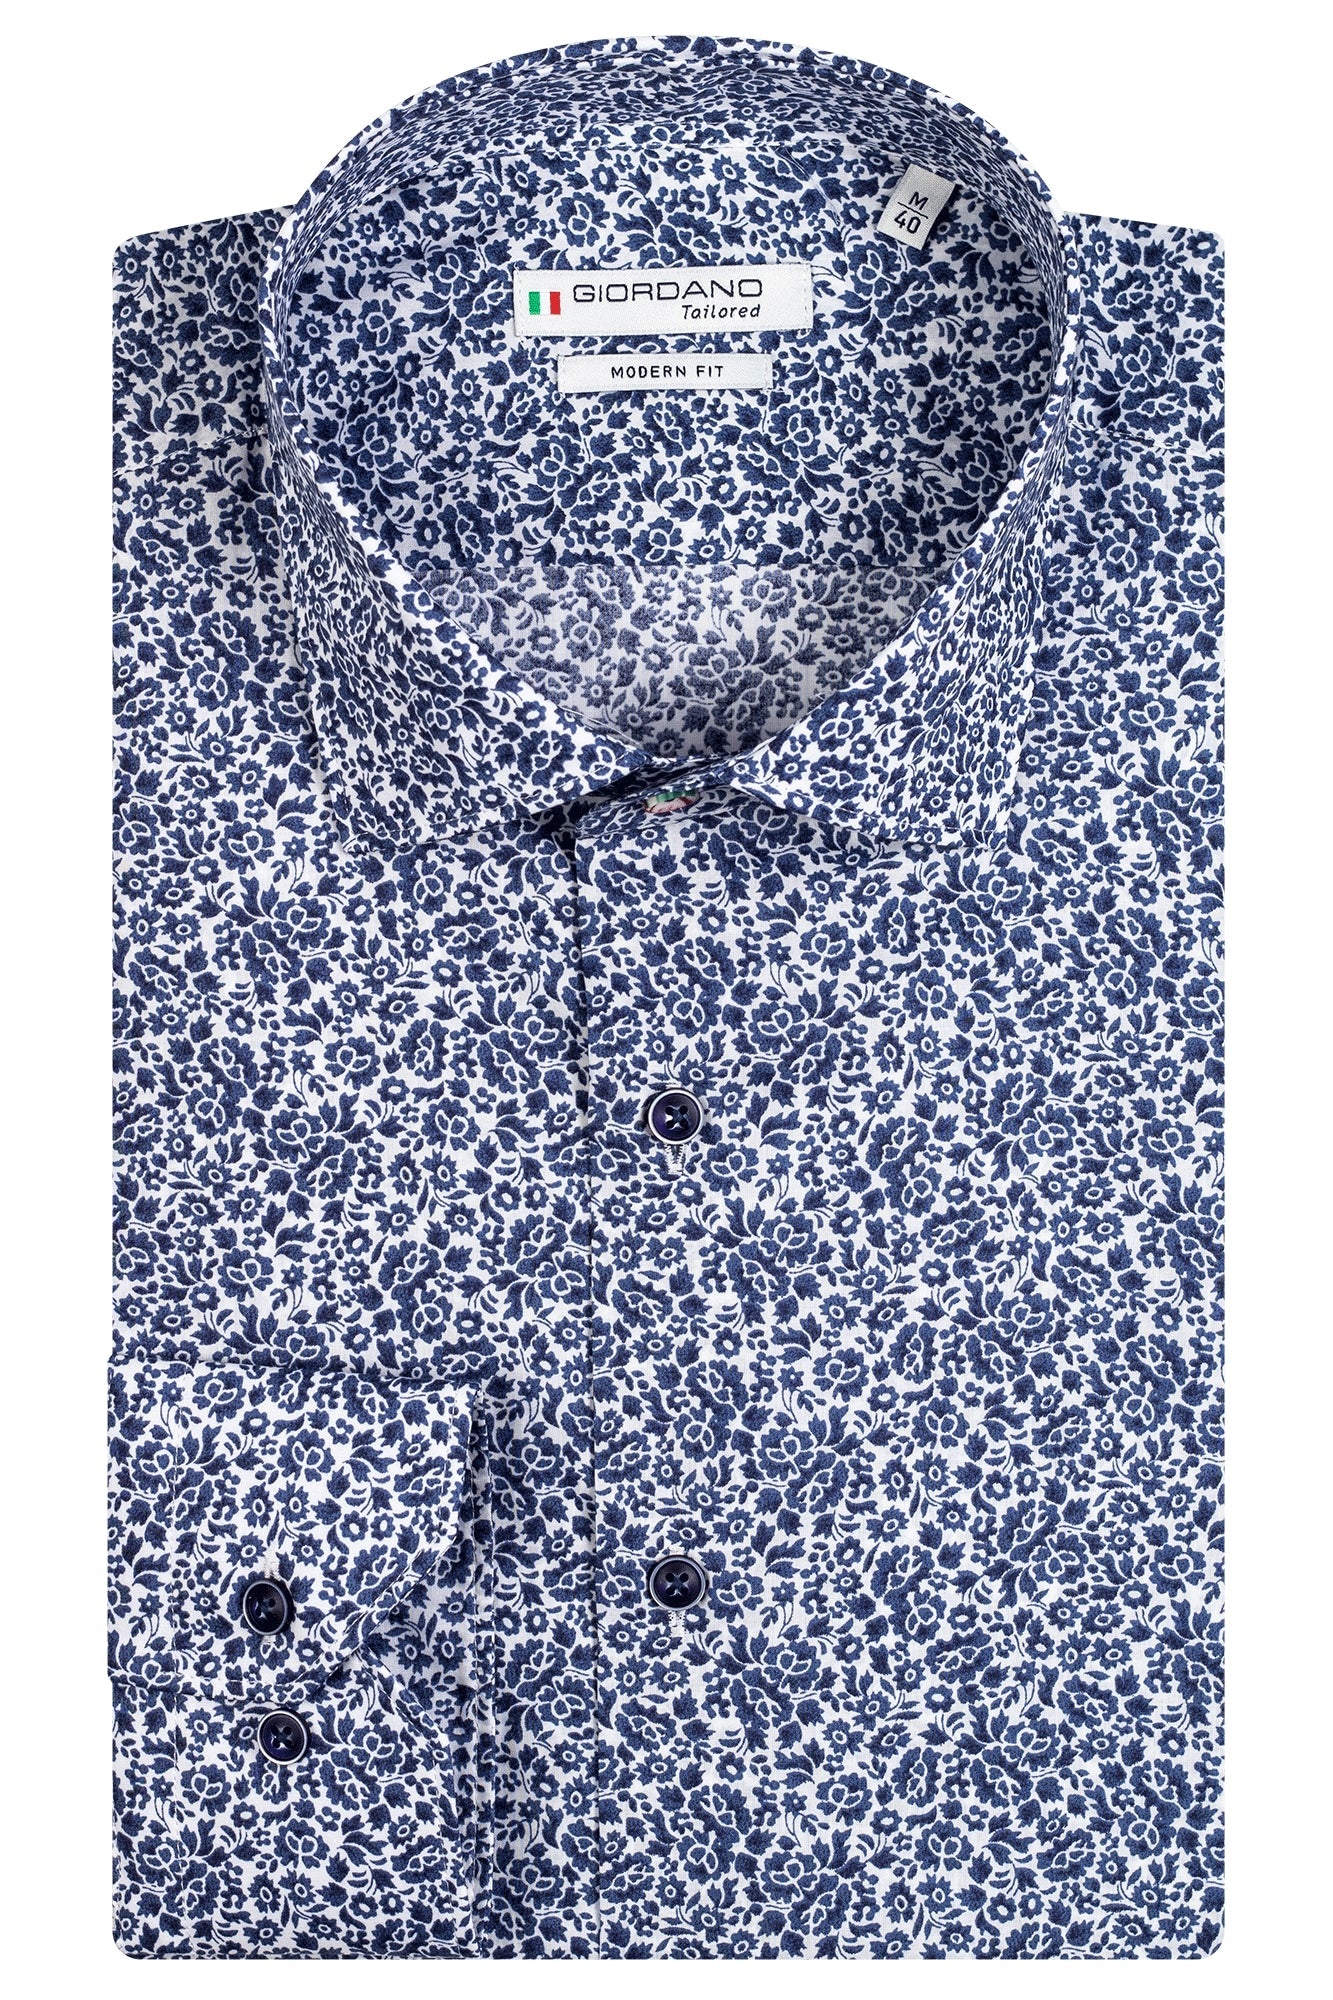 Giordano 100% cotton shirt. White and navy floral print shirt. The perfect summer light shirt. Dressed casually not tucked in, or more formal tucked in. Great paired with jeans and chinos but also shorts.